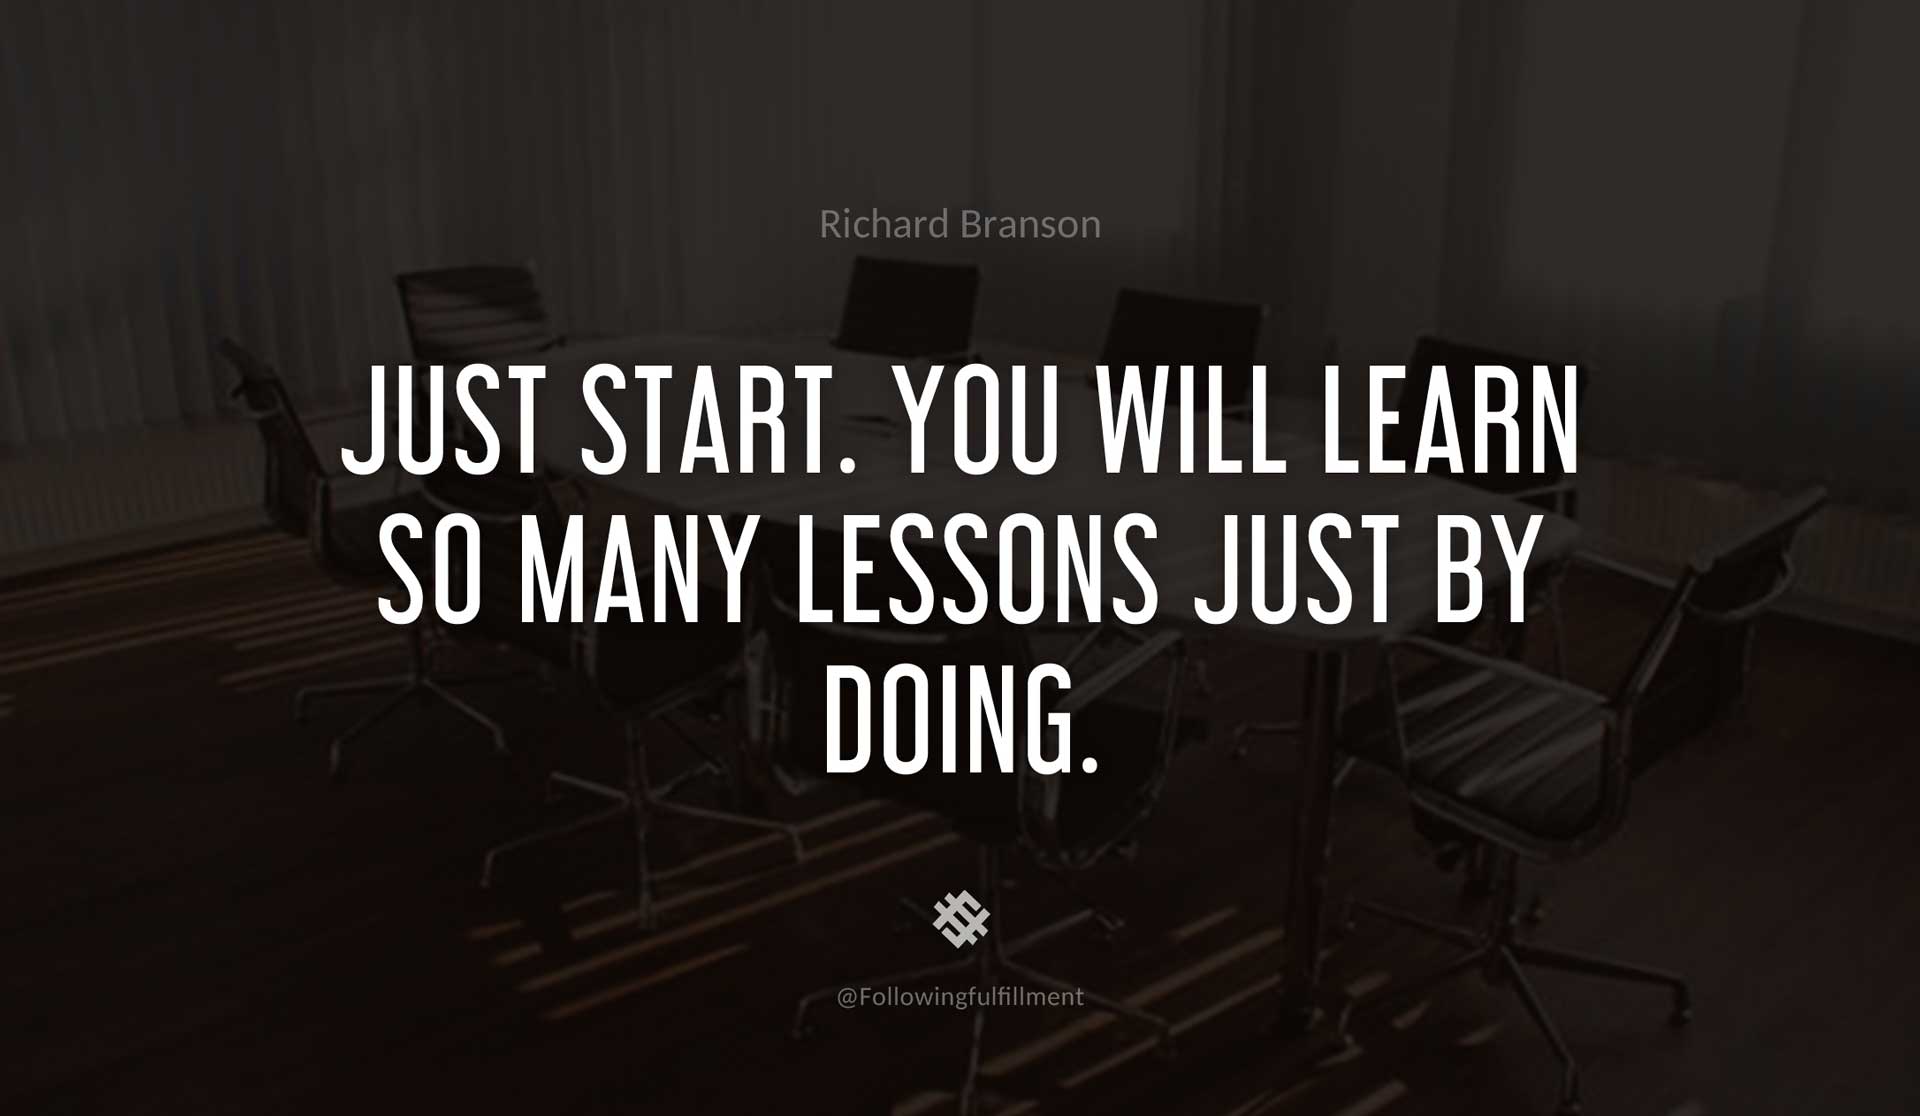 Just-start.-You-will-learn-so-many-lessons-just-by-doing.-RICHARD-BRANSON-Quote.jpg